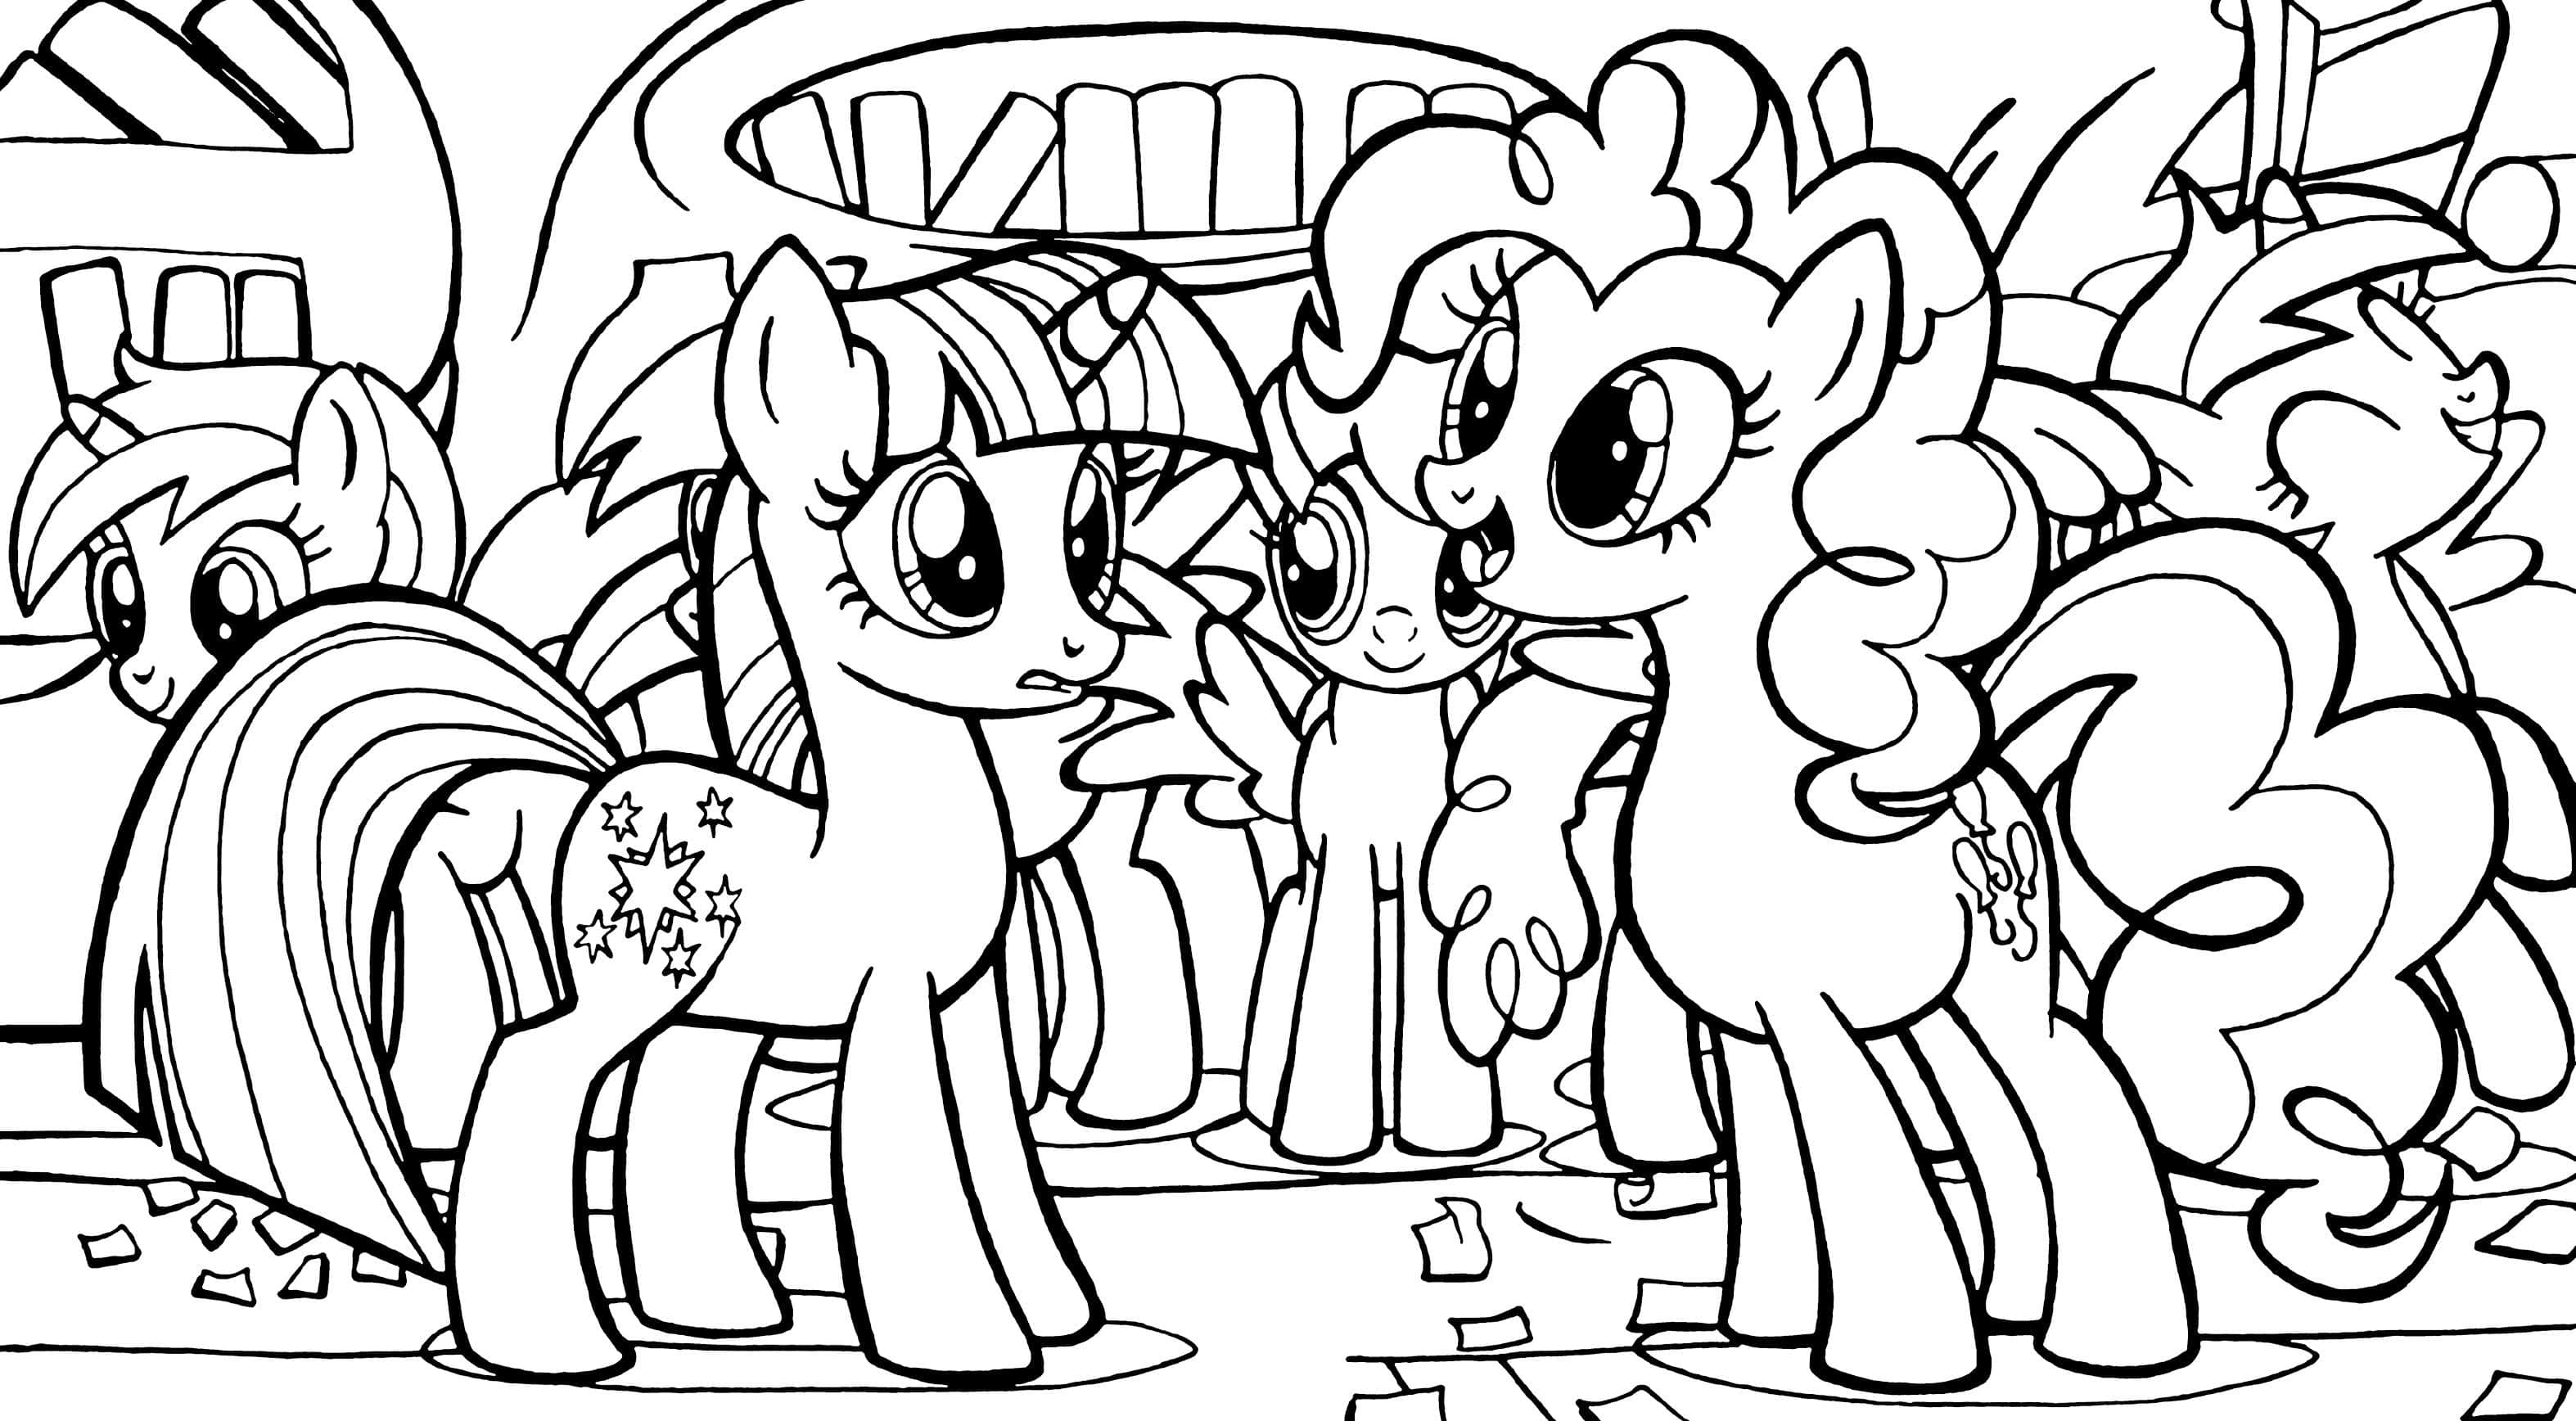 Rainbow Dash new Coloring Page